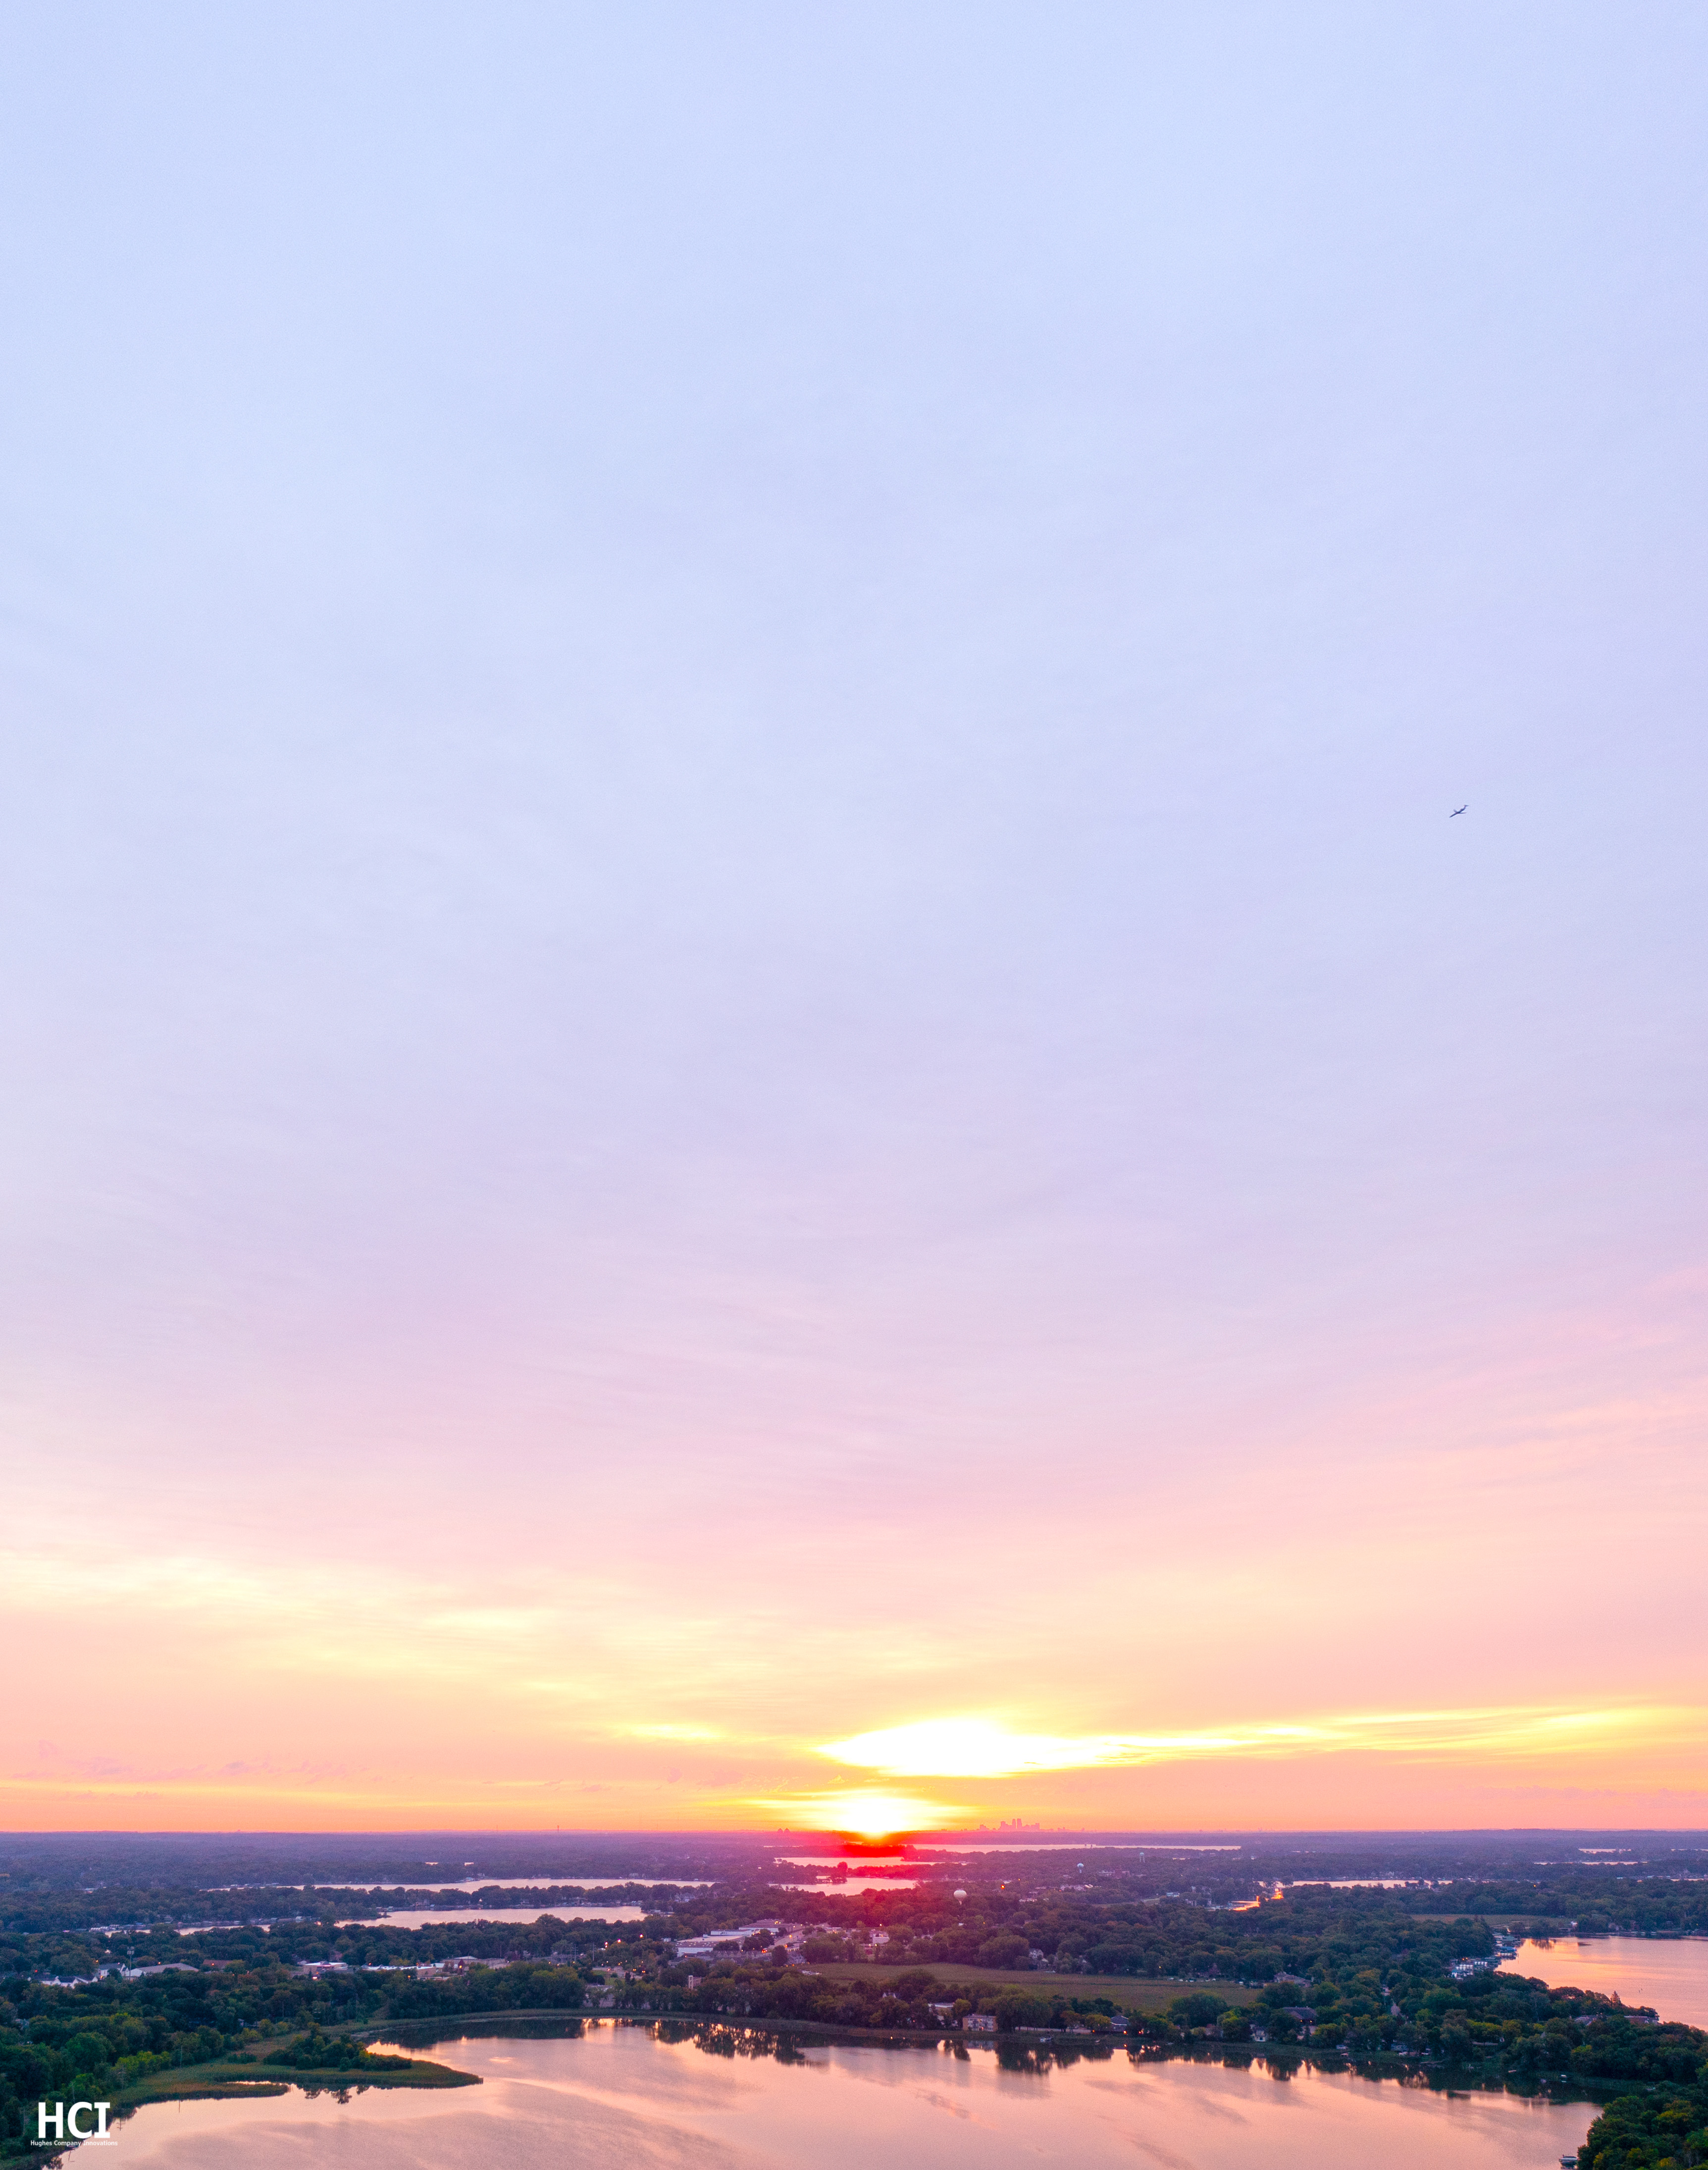 Brilliant aerial sunrise with Minneapolis, Lake Minnetonka, and a flying airplane.